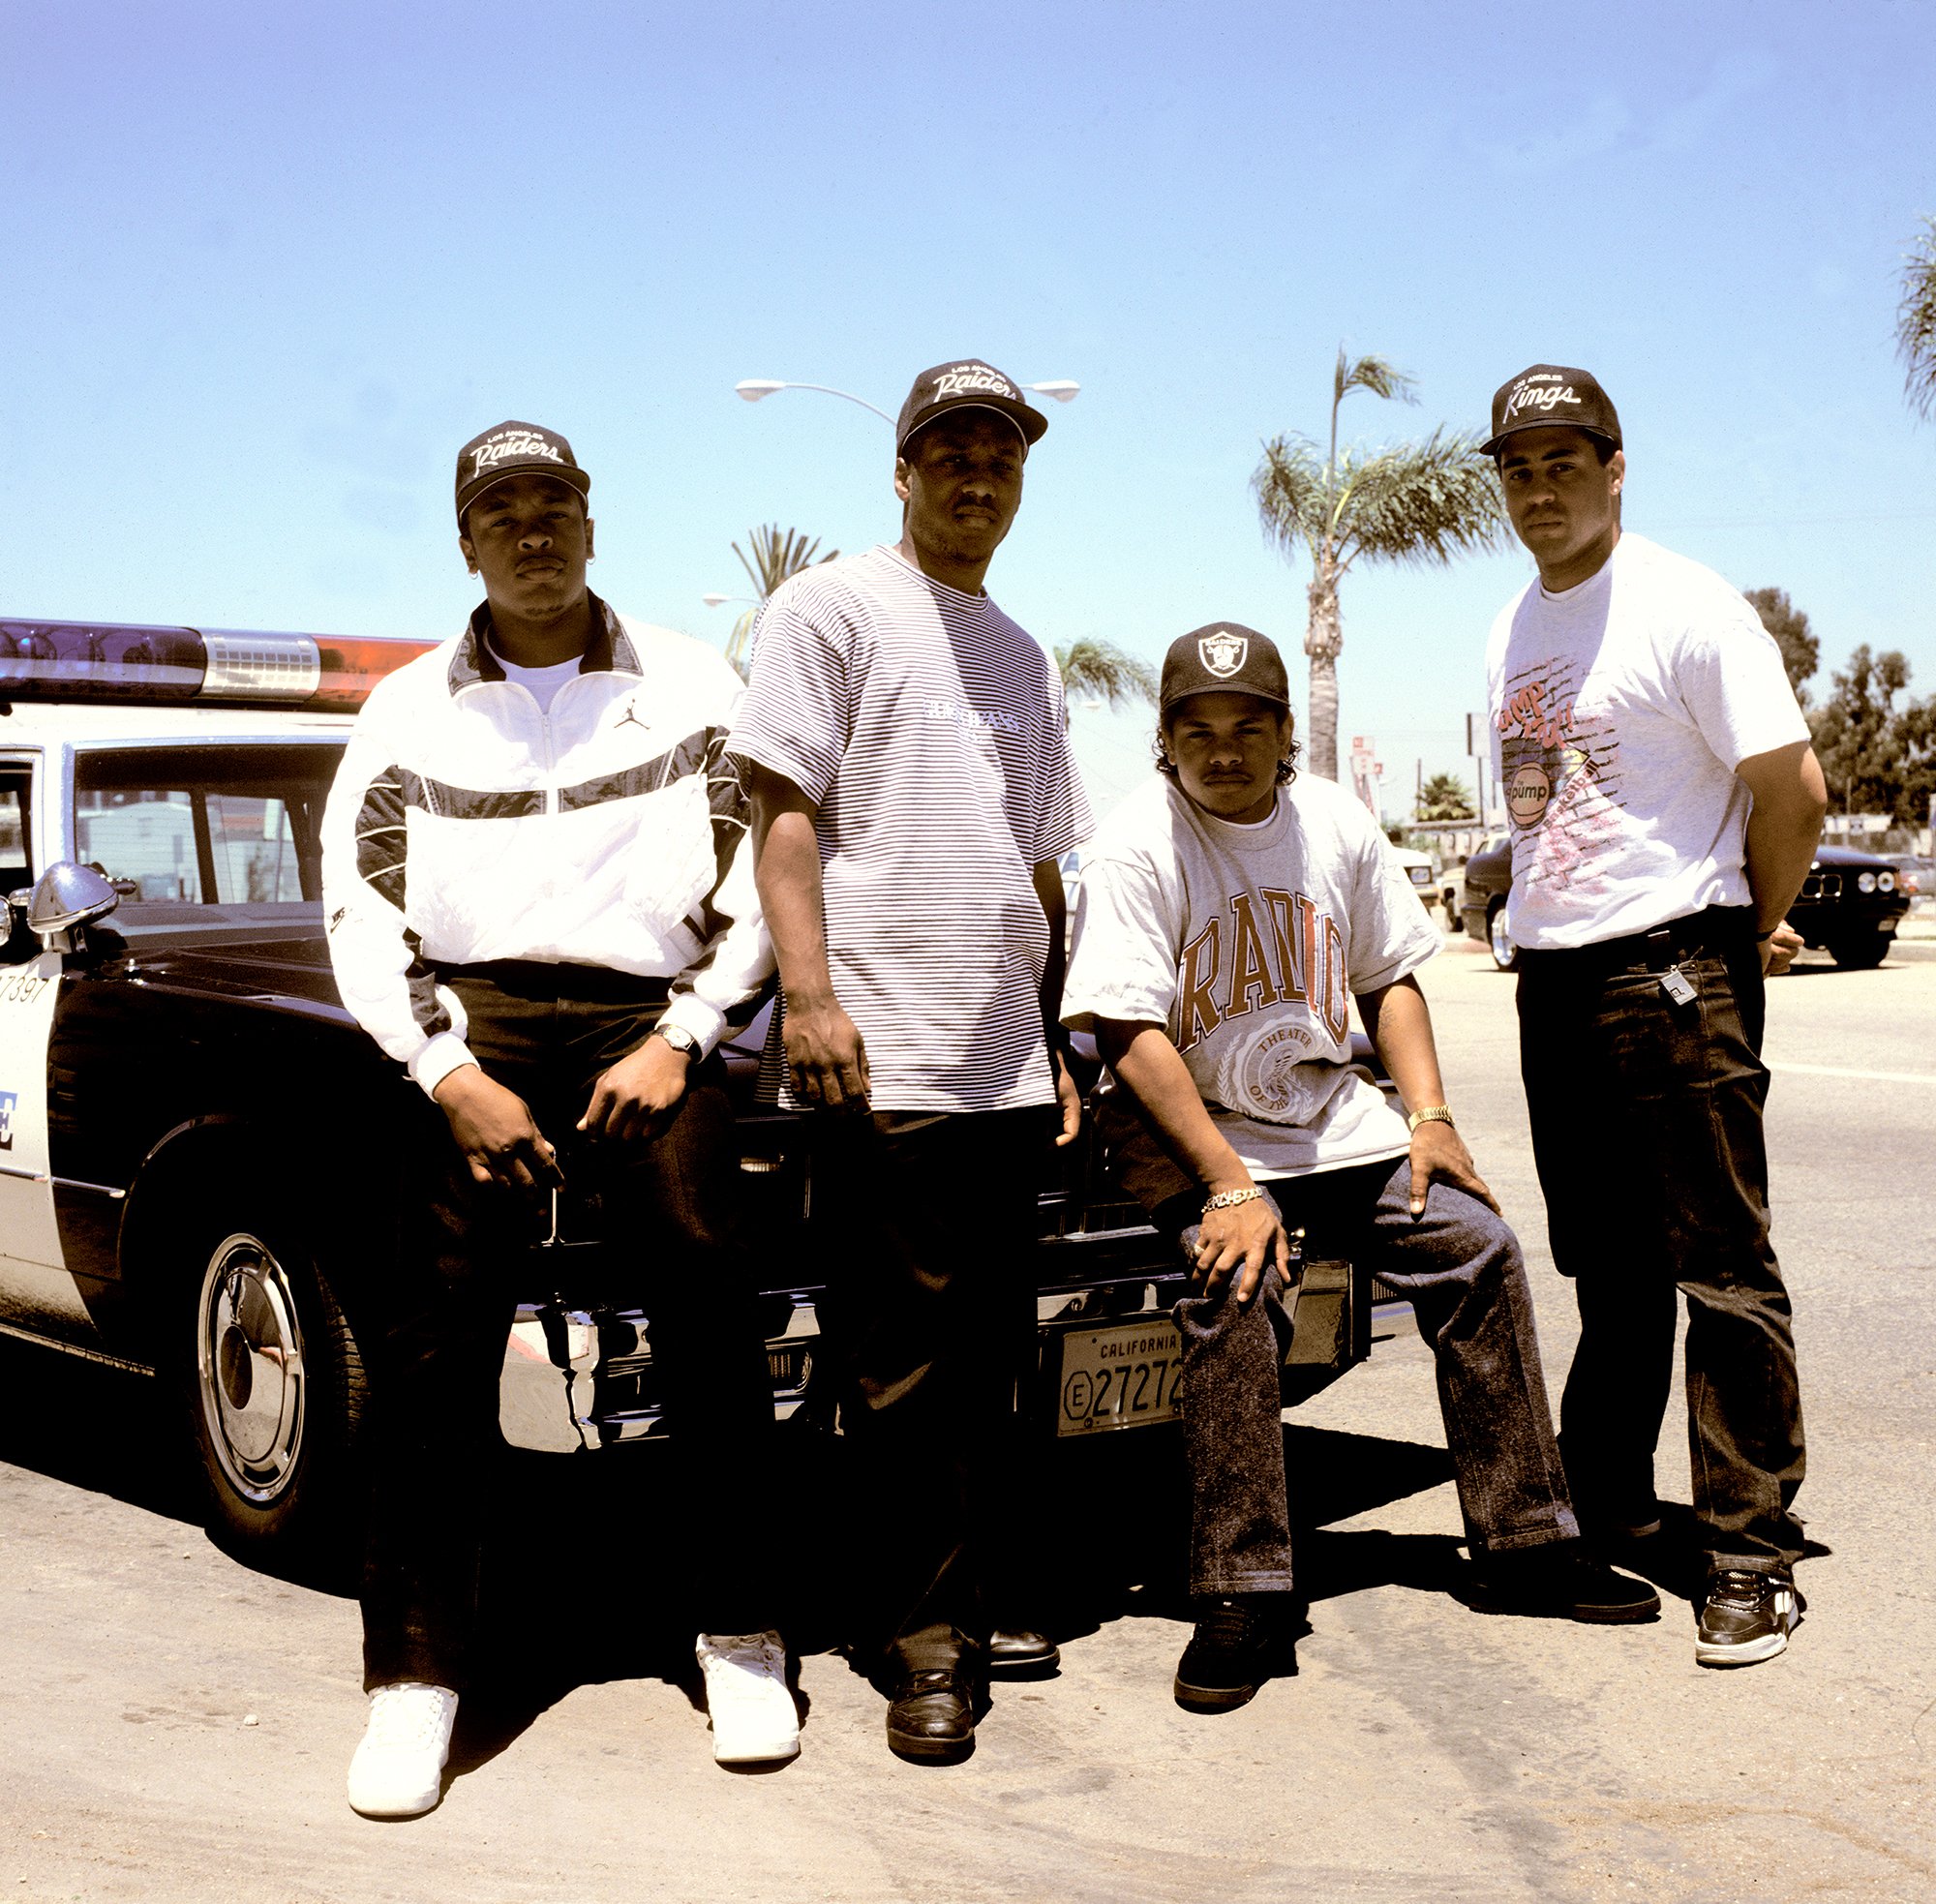 NWA, Torrance, California, 1990 © Janette Beckman; courtesy of Fahey/Klein Gallery, Los Angeles